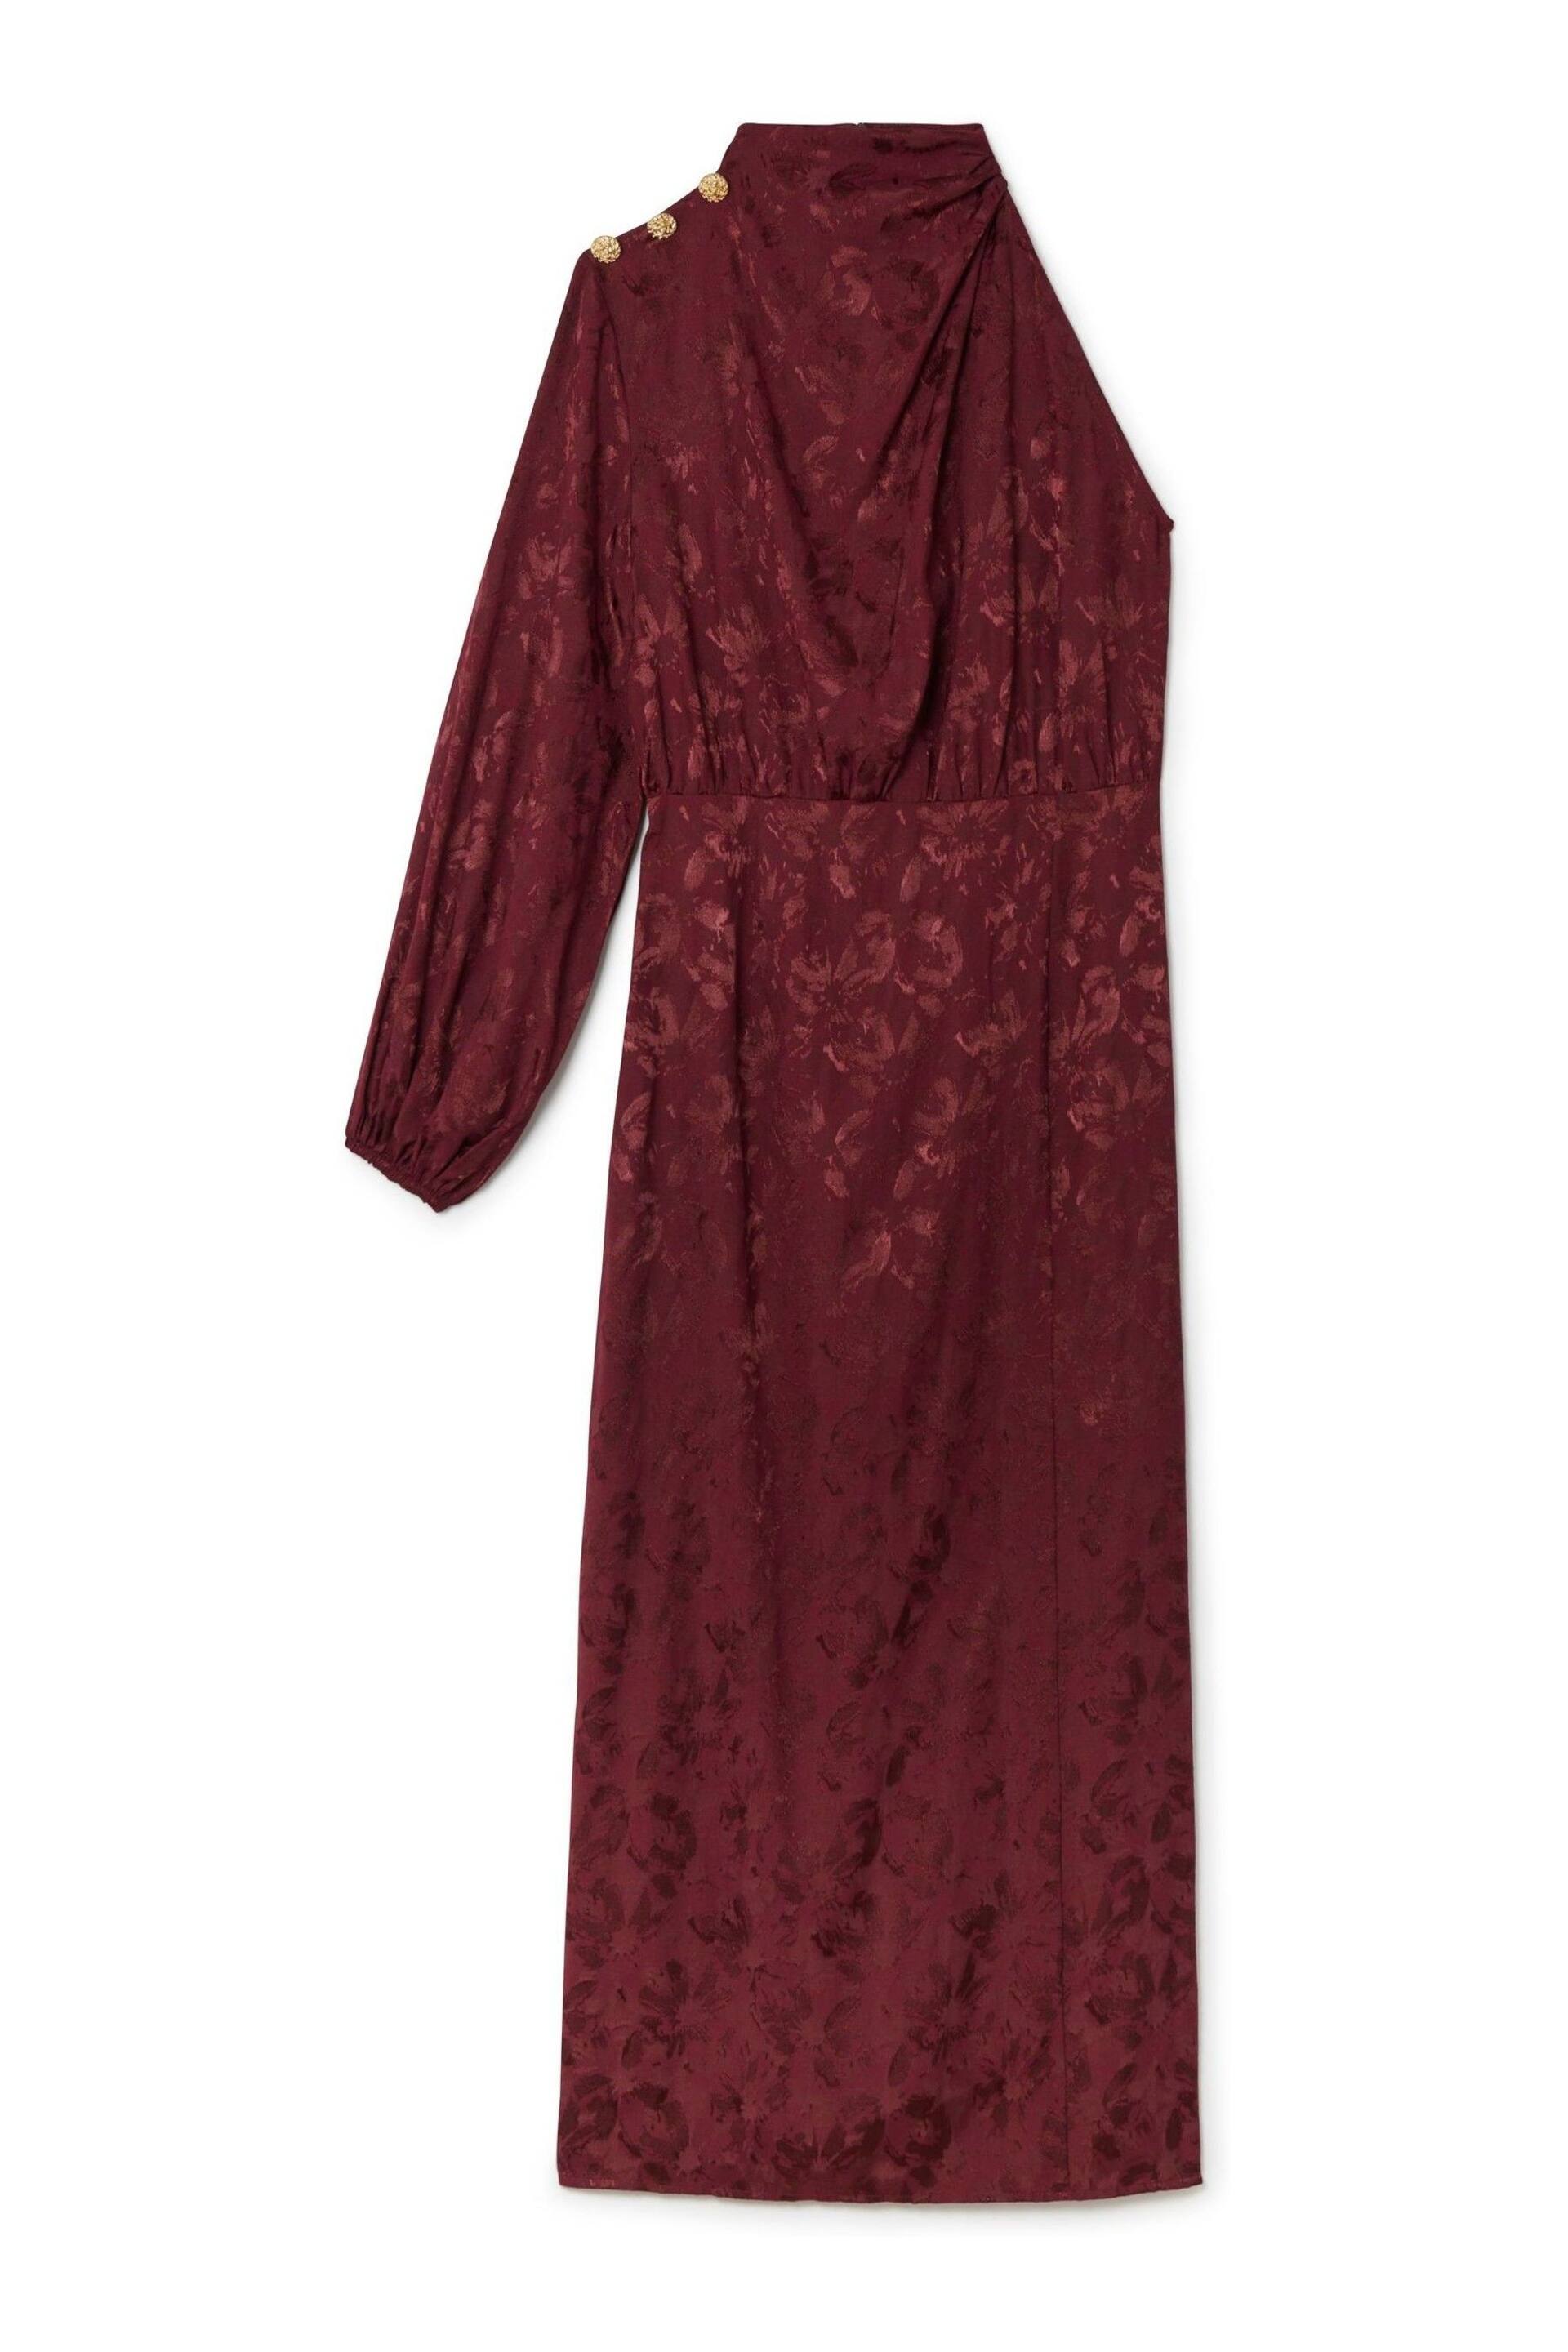 Another Sunday One Shoulder Jacquard Midi Dress With Gold Buttons - Image 6 of 8